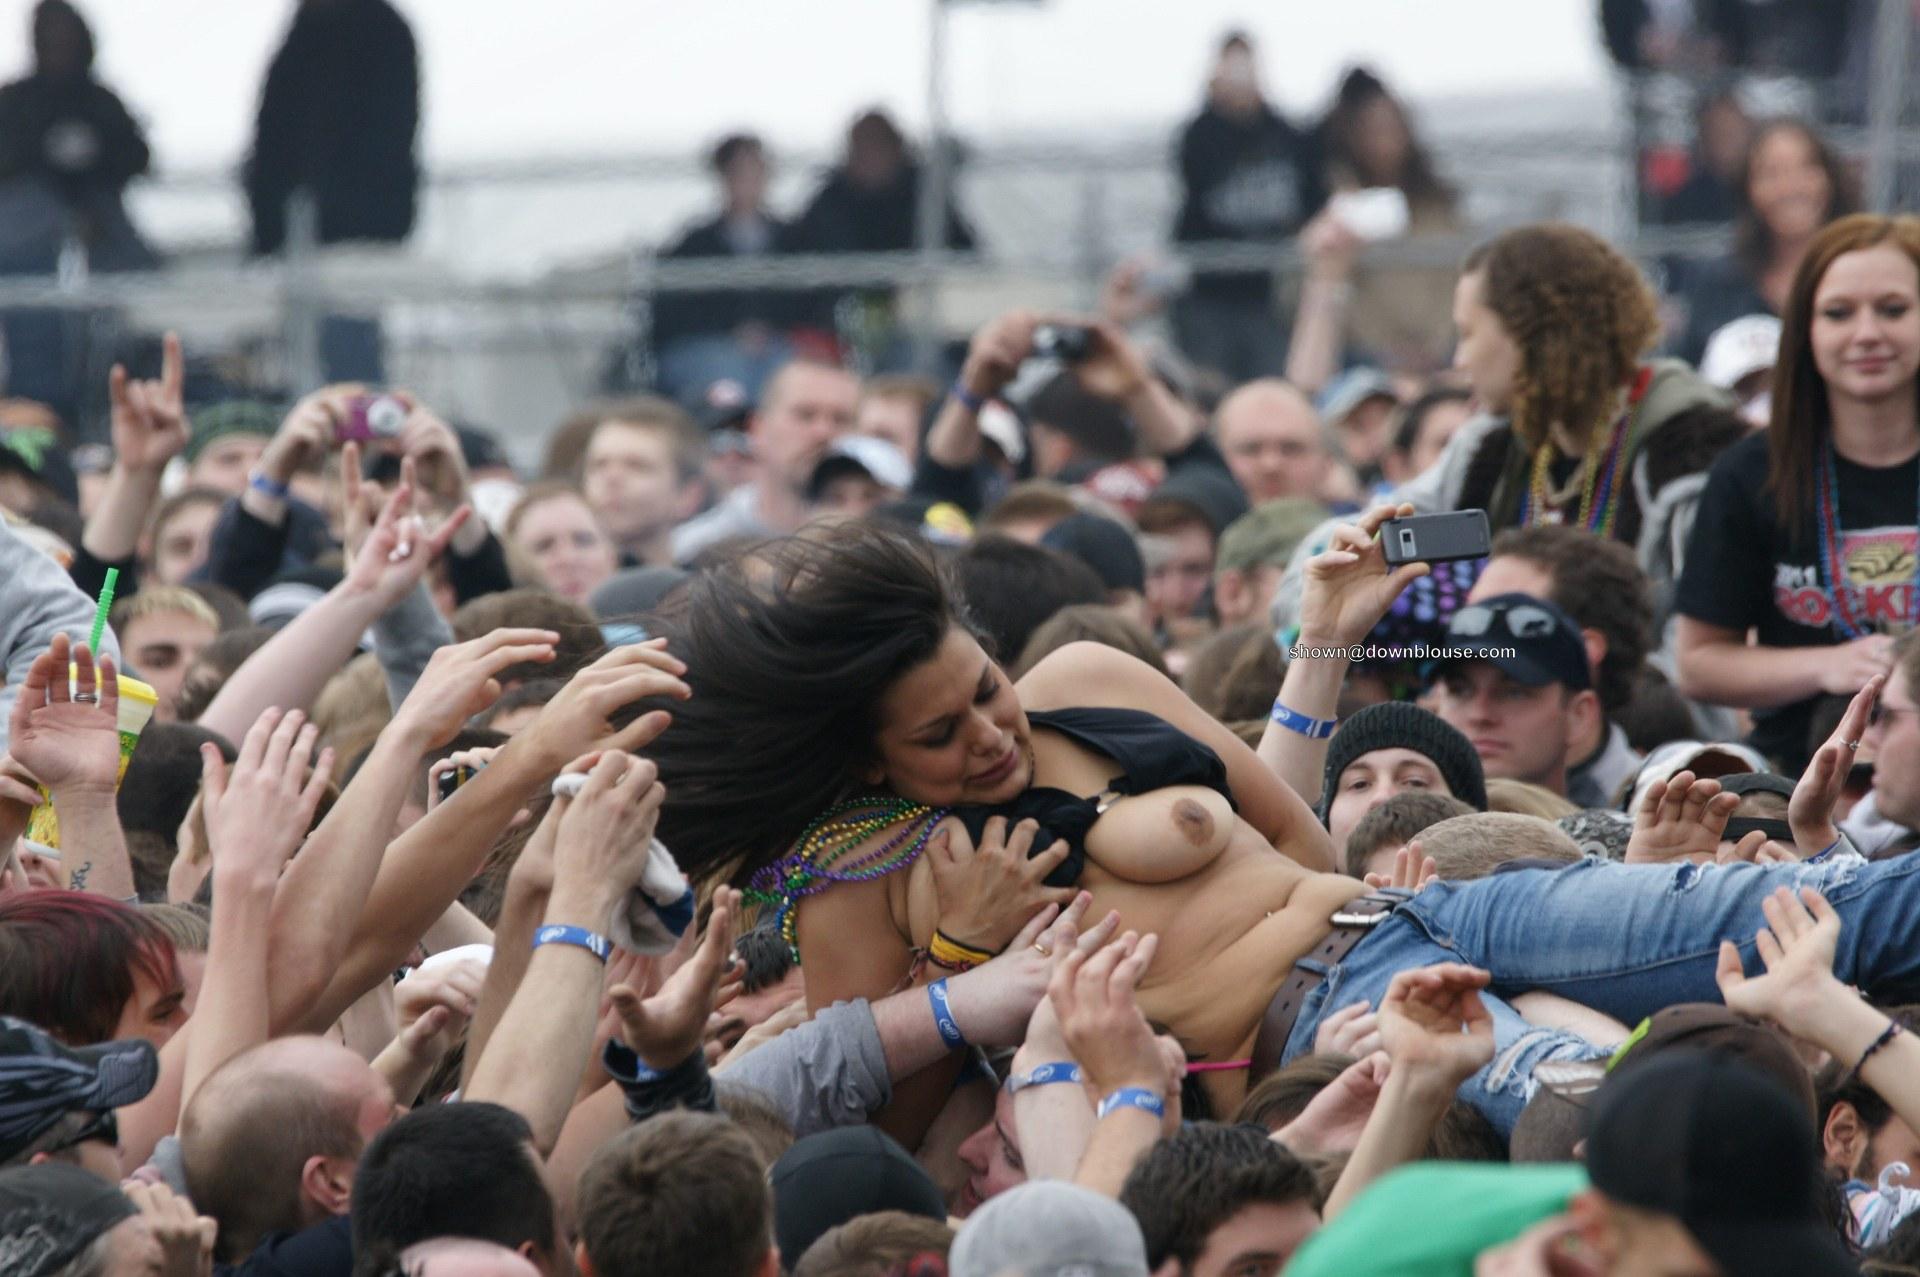 Crowd surfing porn - free nude pictures, naked, photos, Stripped crowd surf...